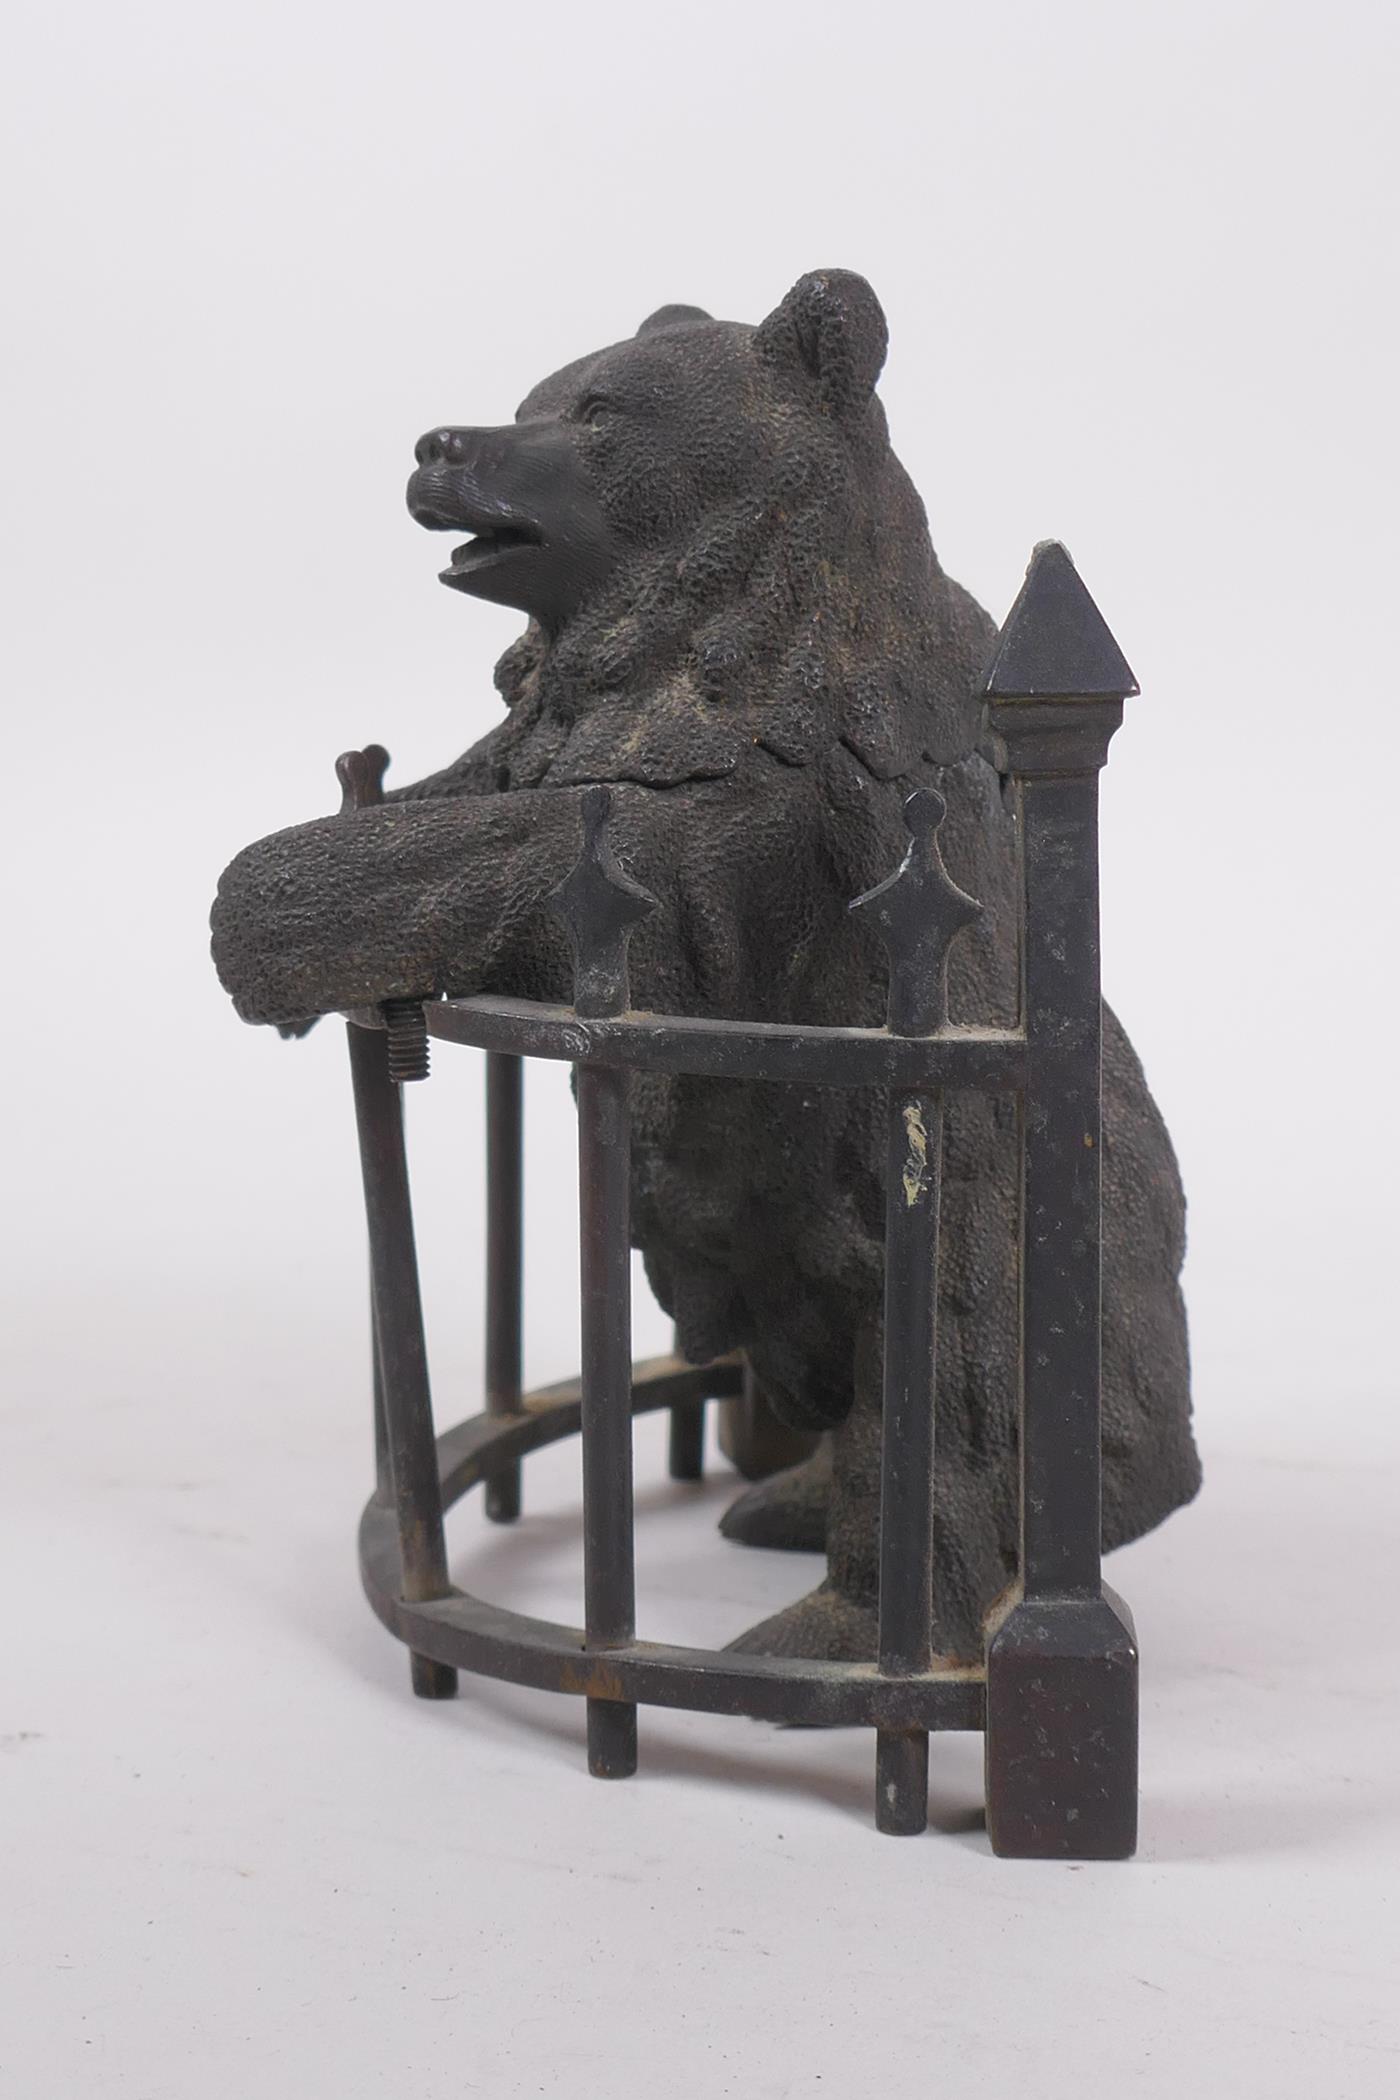 A C19th finely cast patinated bronze inkwell in the form of a bear behind railings, 12cm high - Image 3 of 7